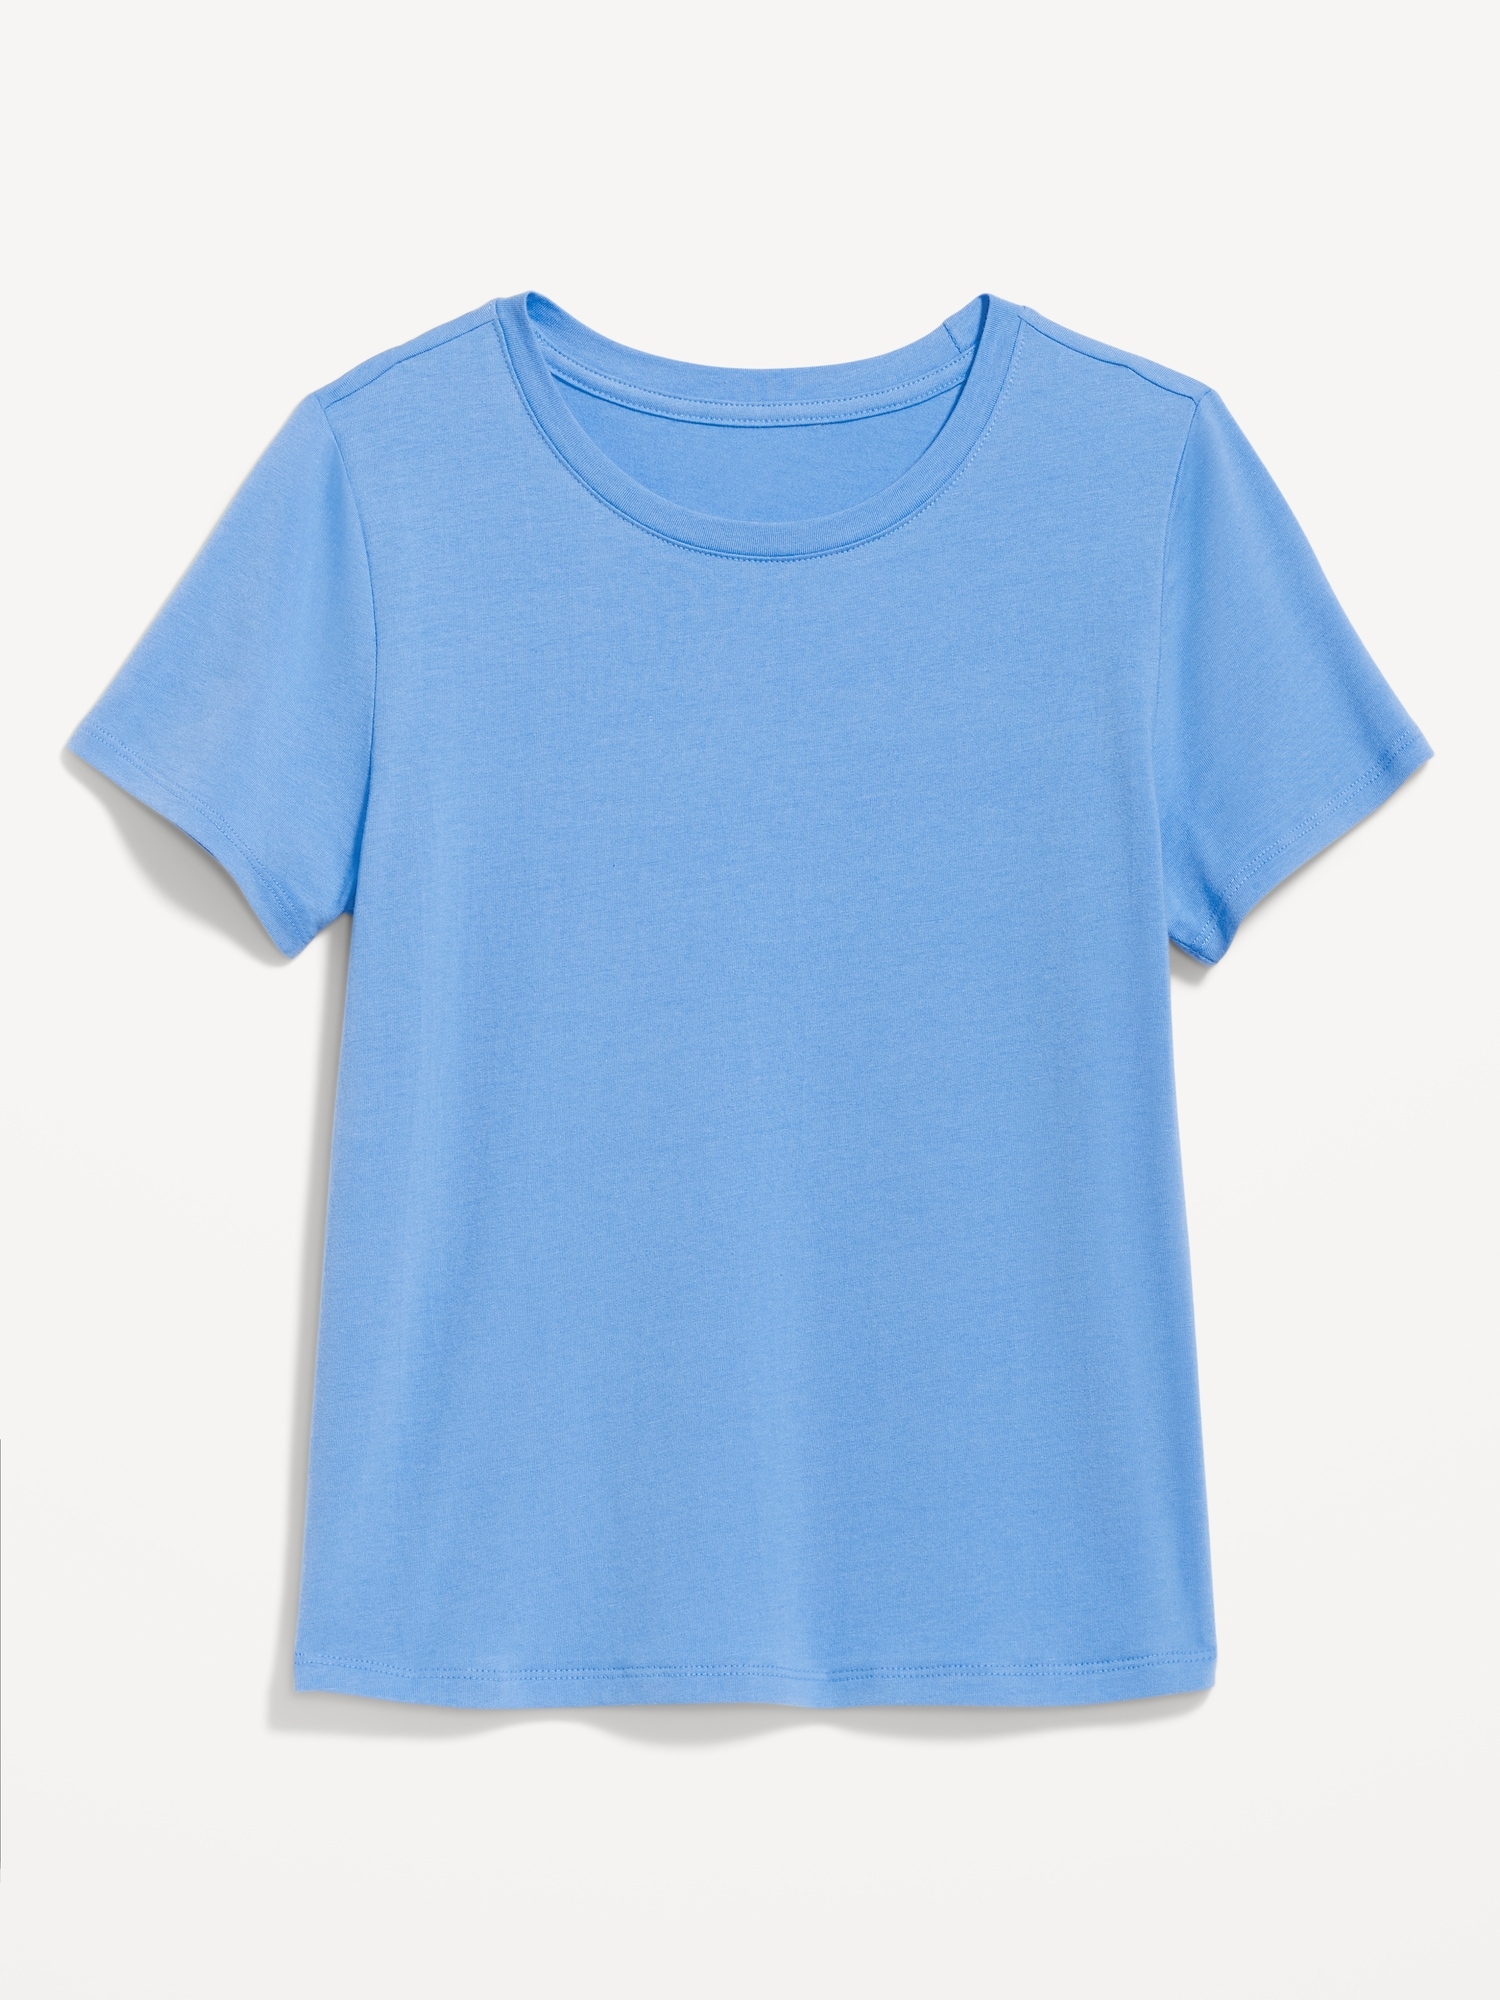 Bestee Cropped Crew-Neck T-Shirt | Old Navy